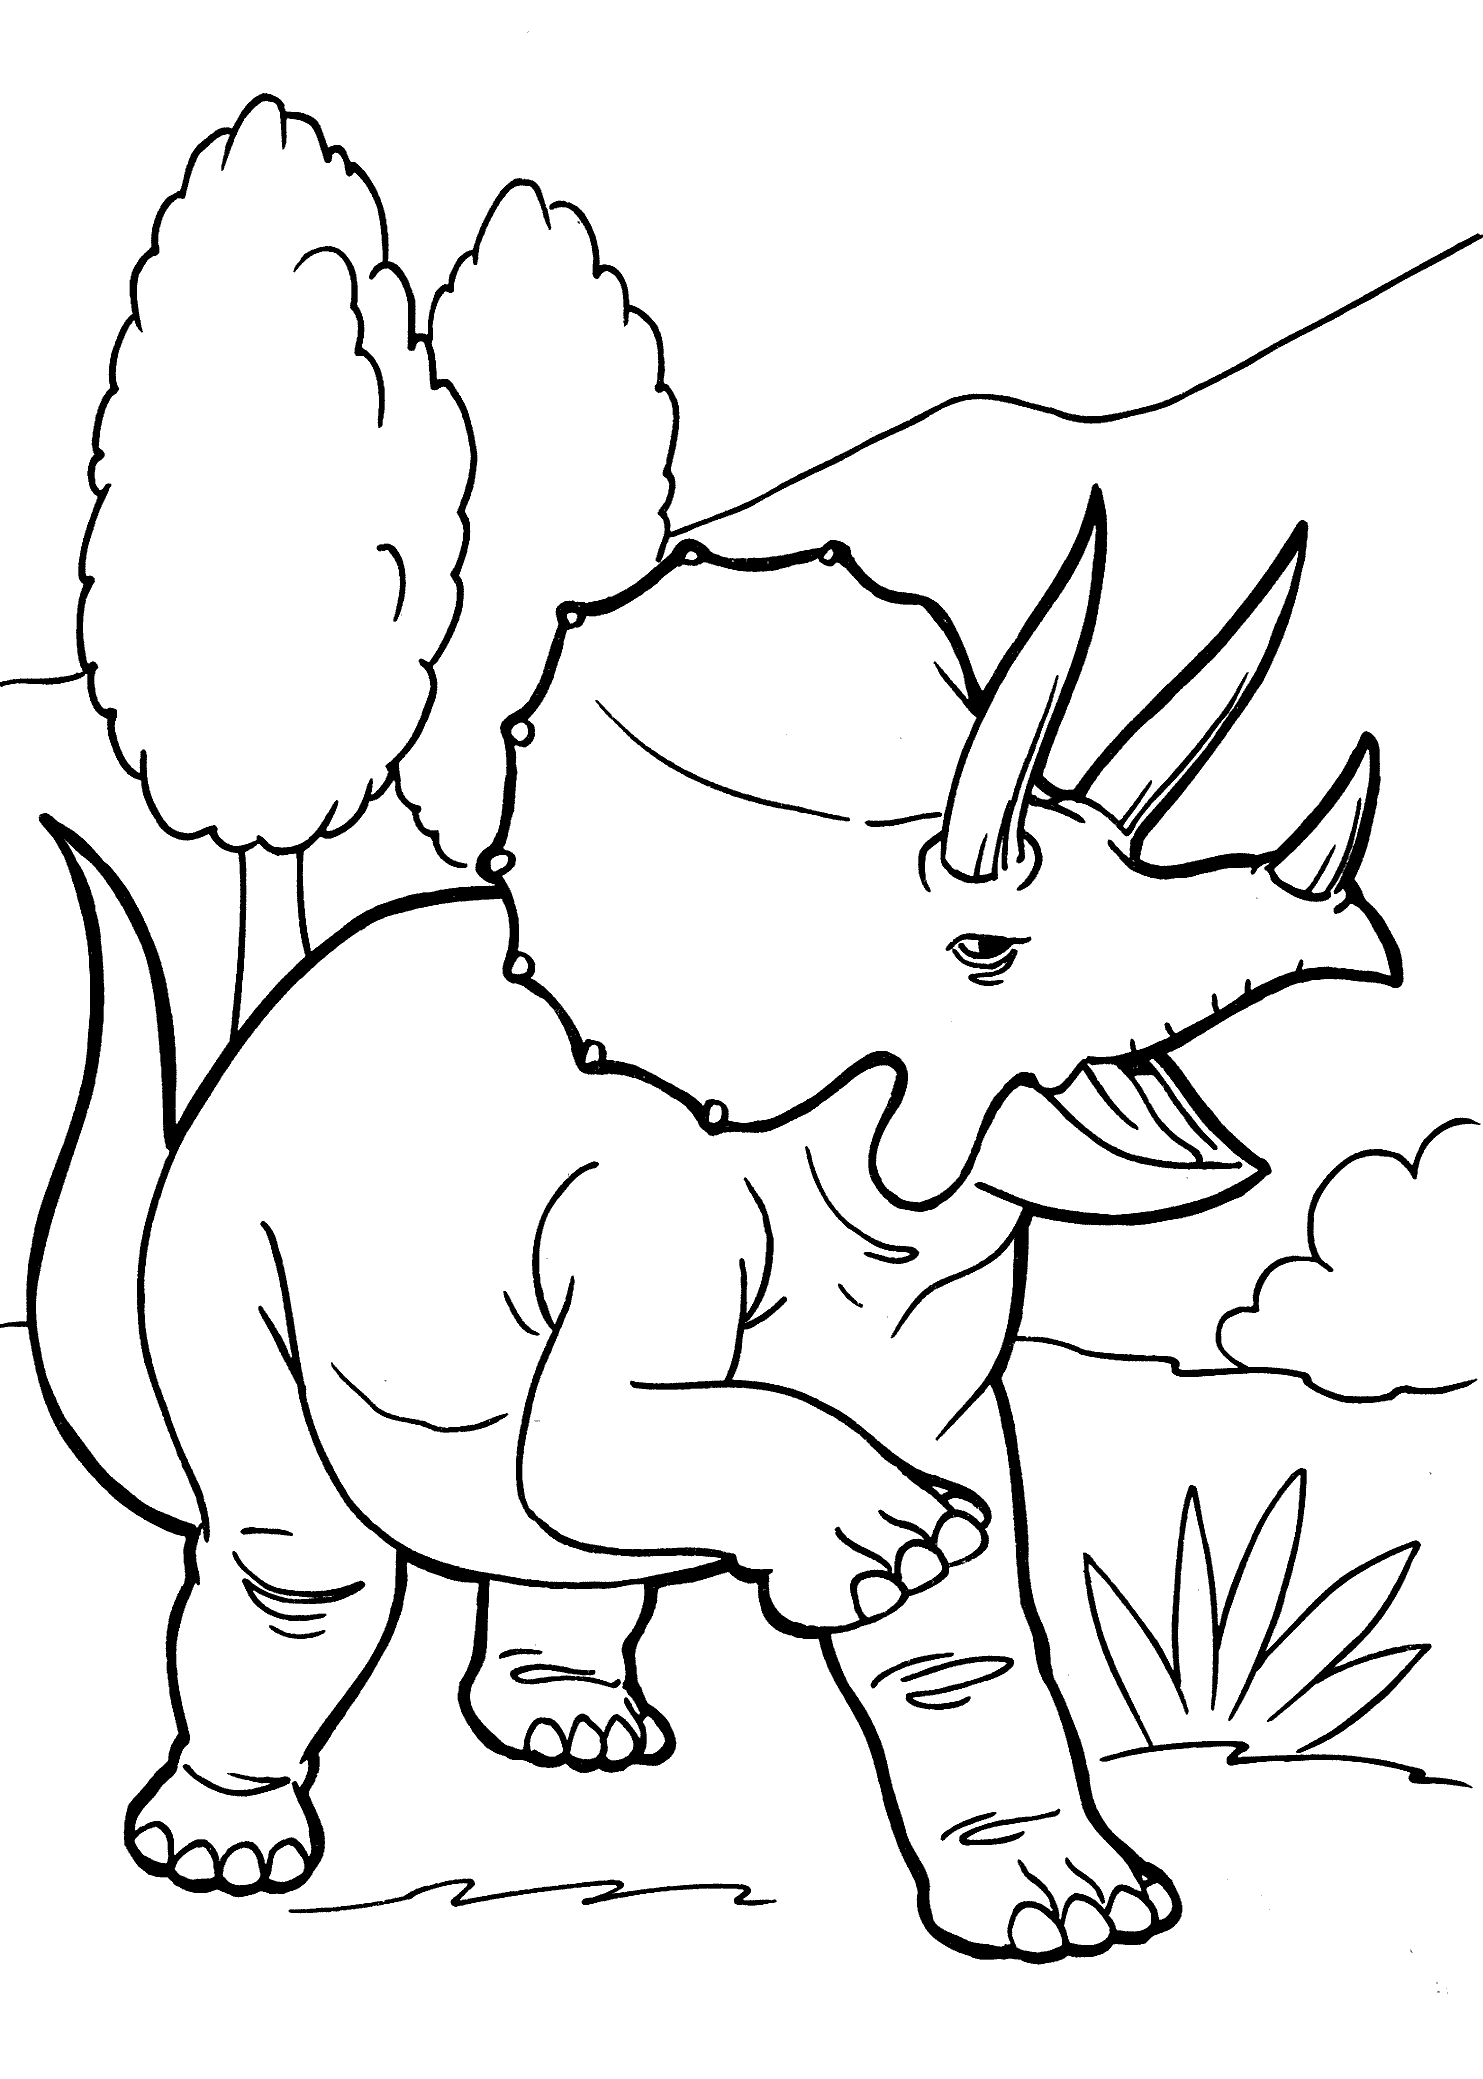 Simple Dinosaur Coloring Pages - Coloring Home